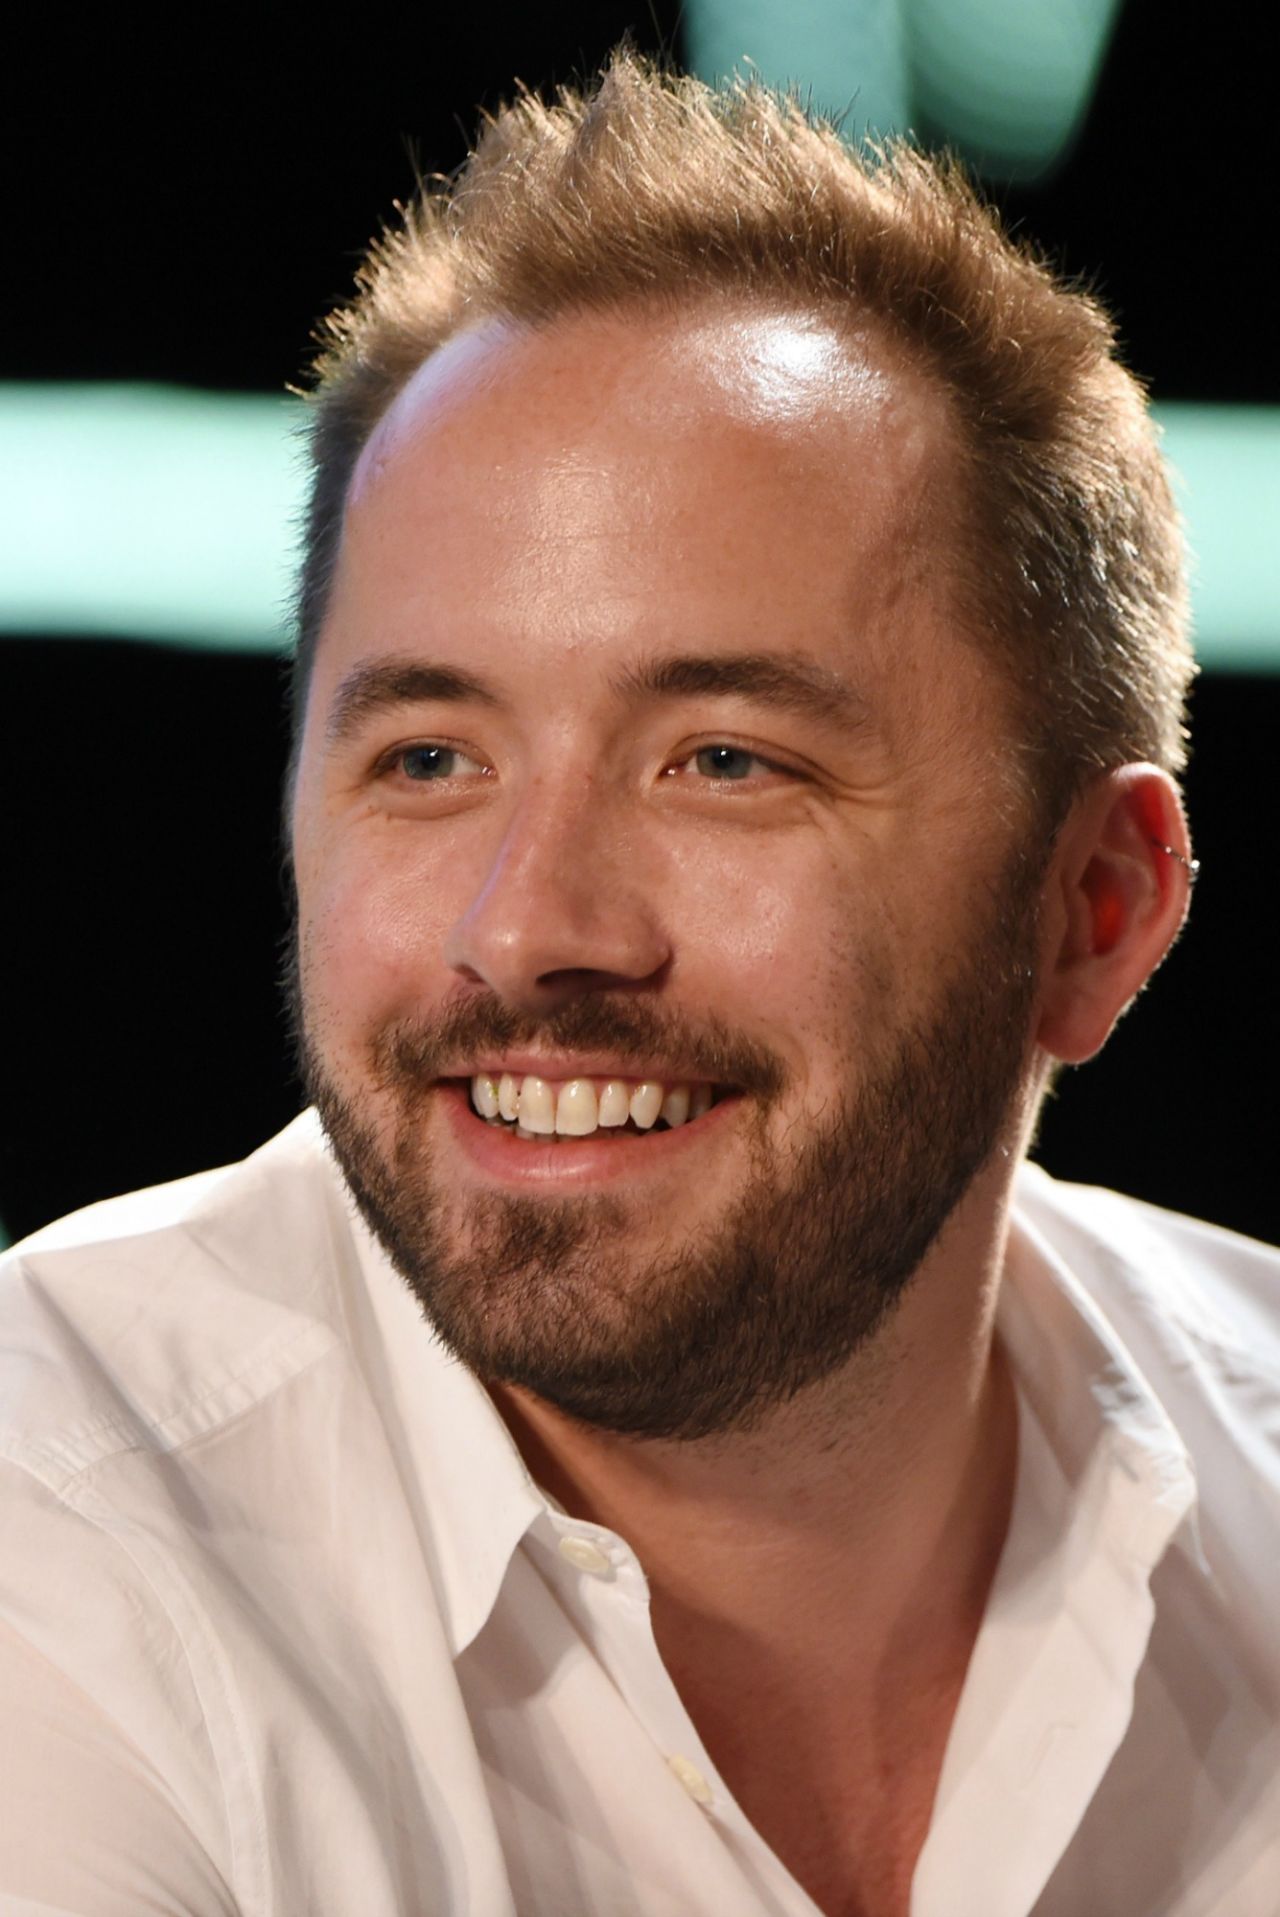 co founder of dropbox